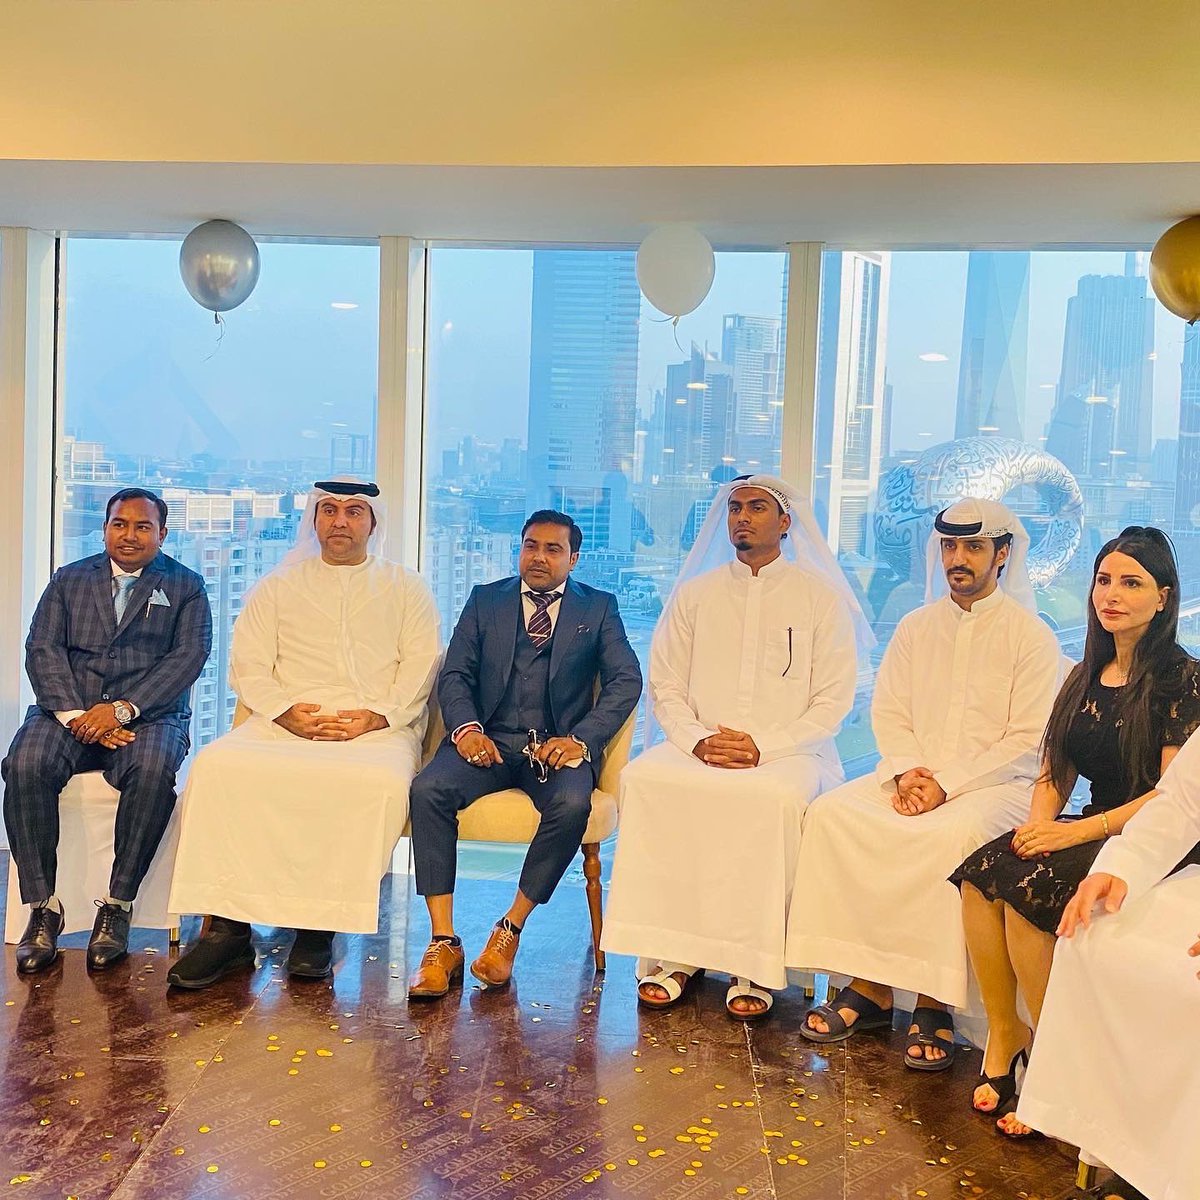 Glimpse of “Goldessa” launching in Dubai with Dr. Bu Abdullah as a Cheif Guest of the event. Goldessa, a unit of Opesh Group. New Era of Opesh Group in Dubai. #opeshsingh #buabdullahgroup #buabdullah #drbuabdullah #opeshstore #dubai #dubailifestyle #dubailaunching #meghanath